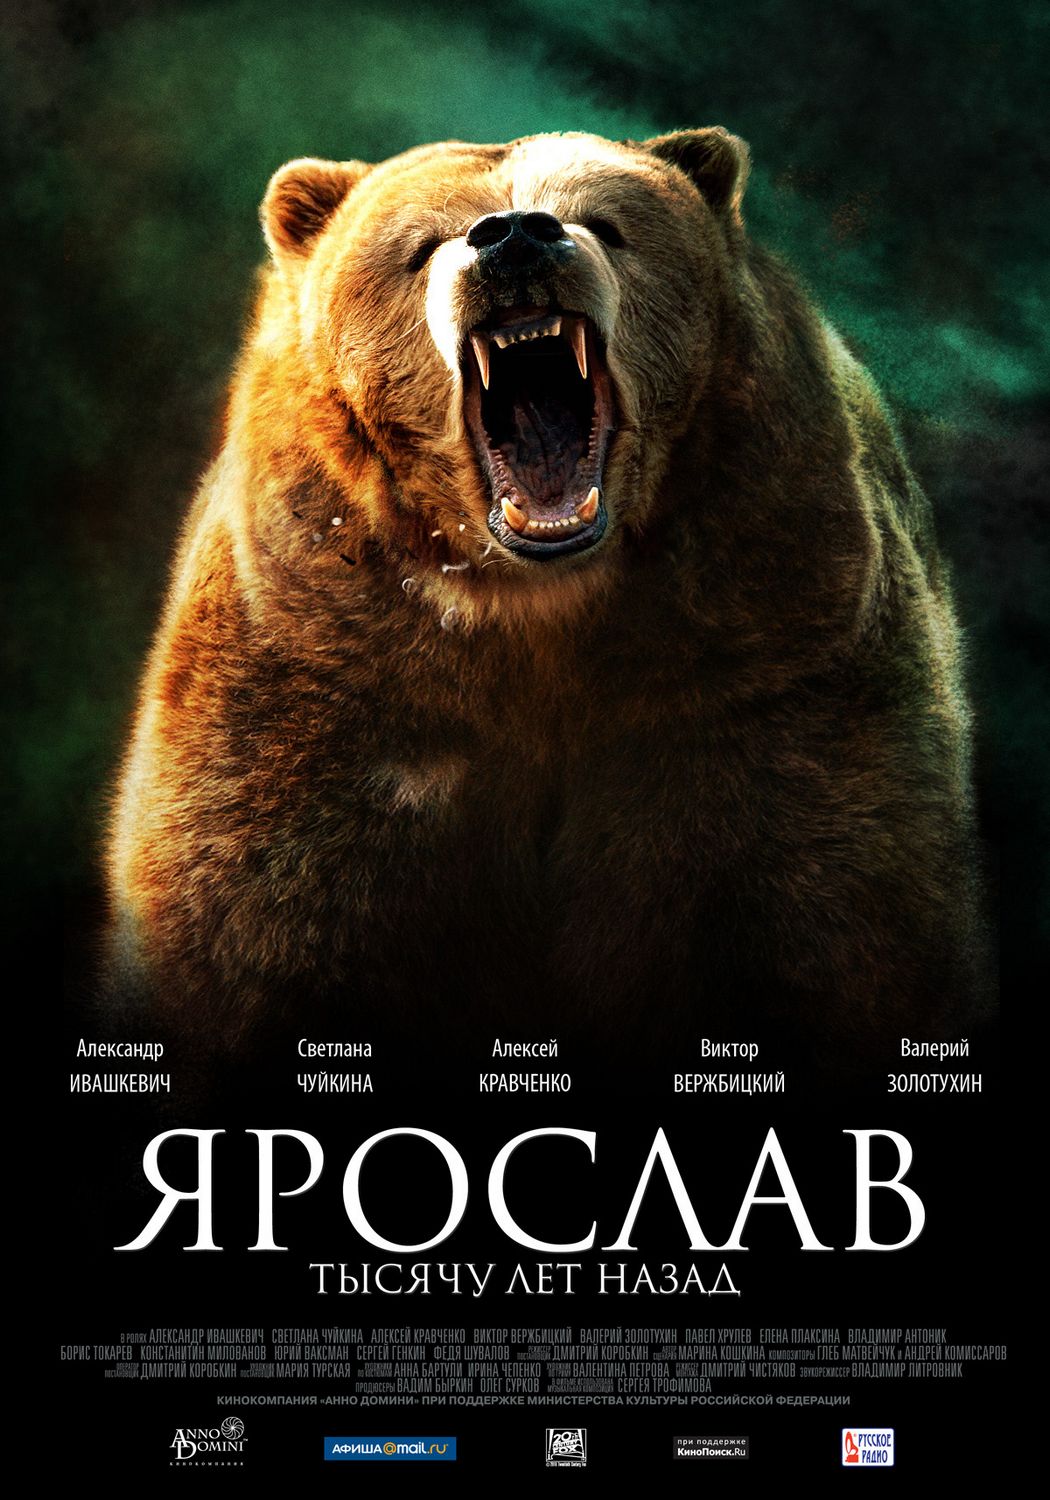 Extra Large Movie Poster Image for Yaroslav (#4 of 5)